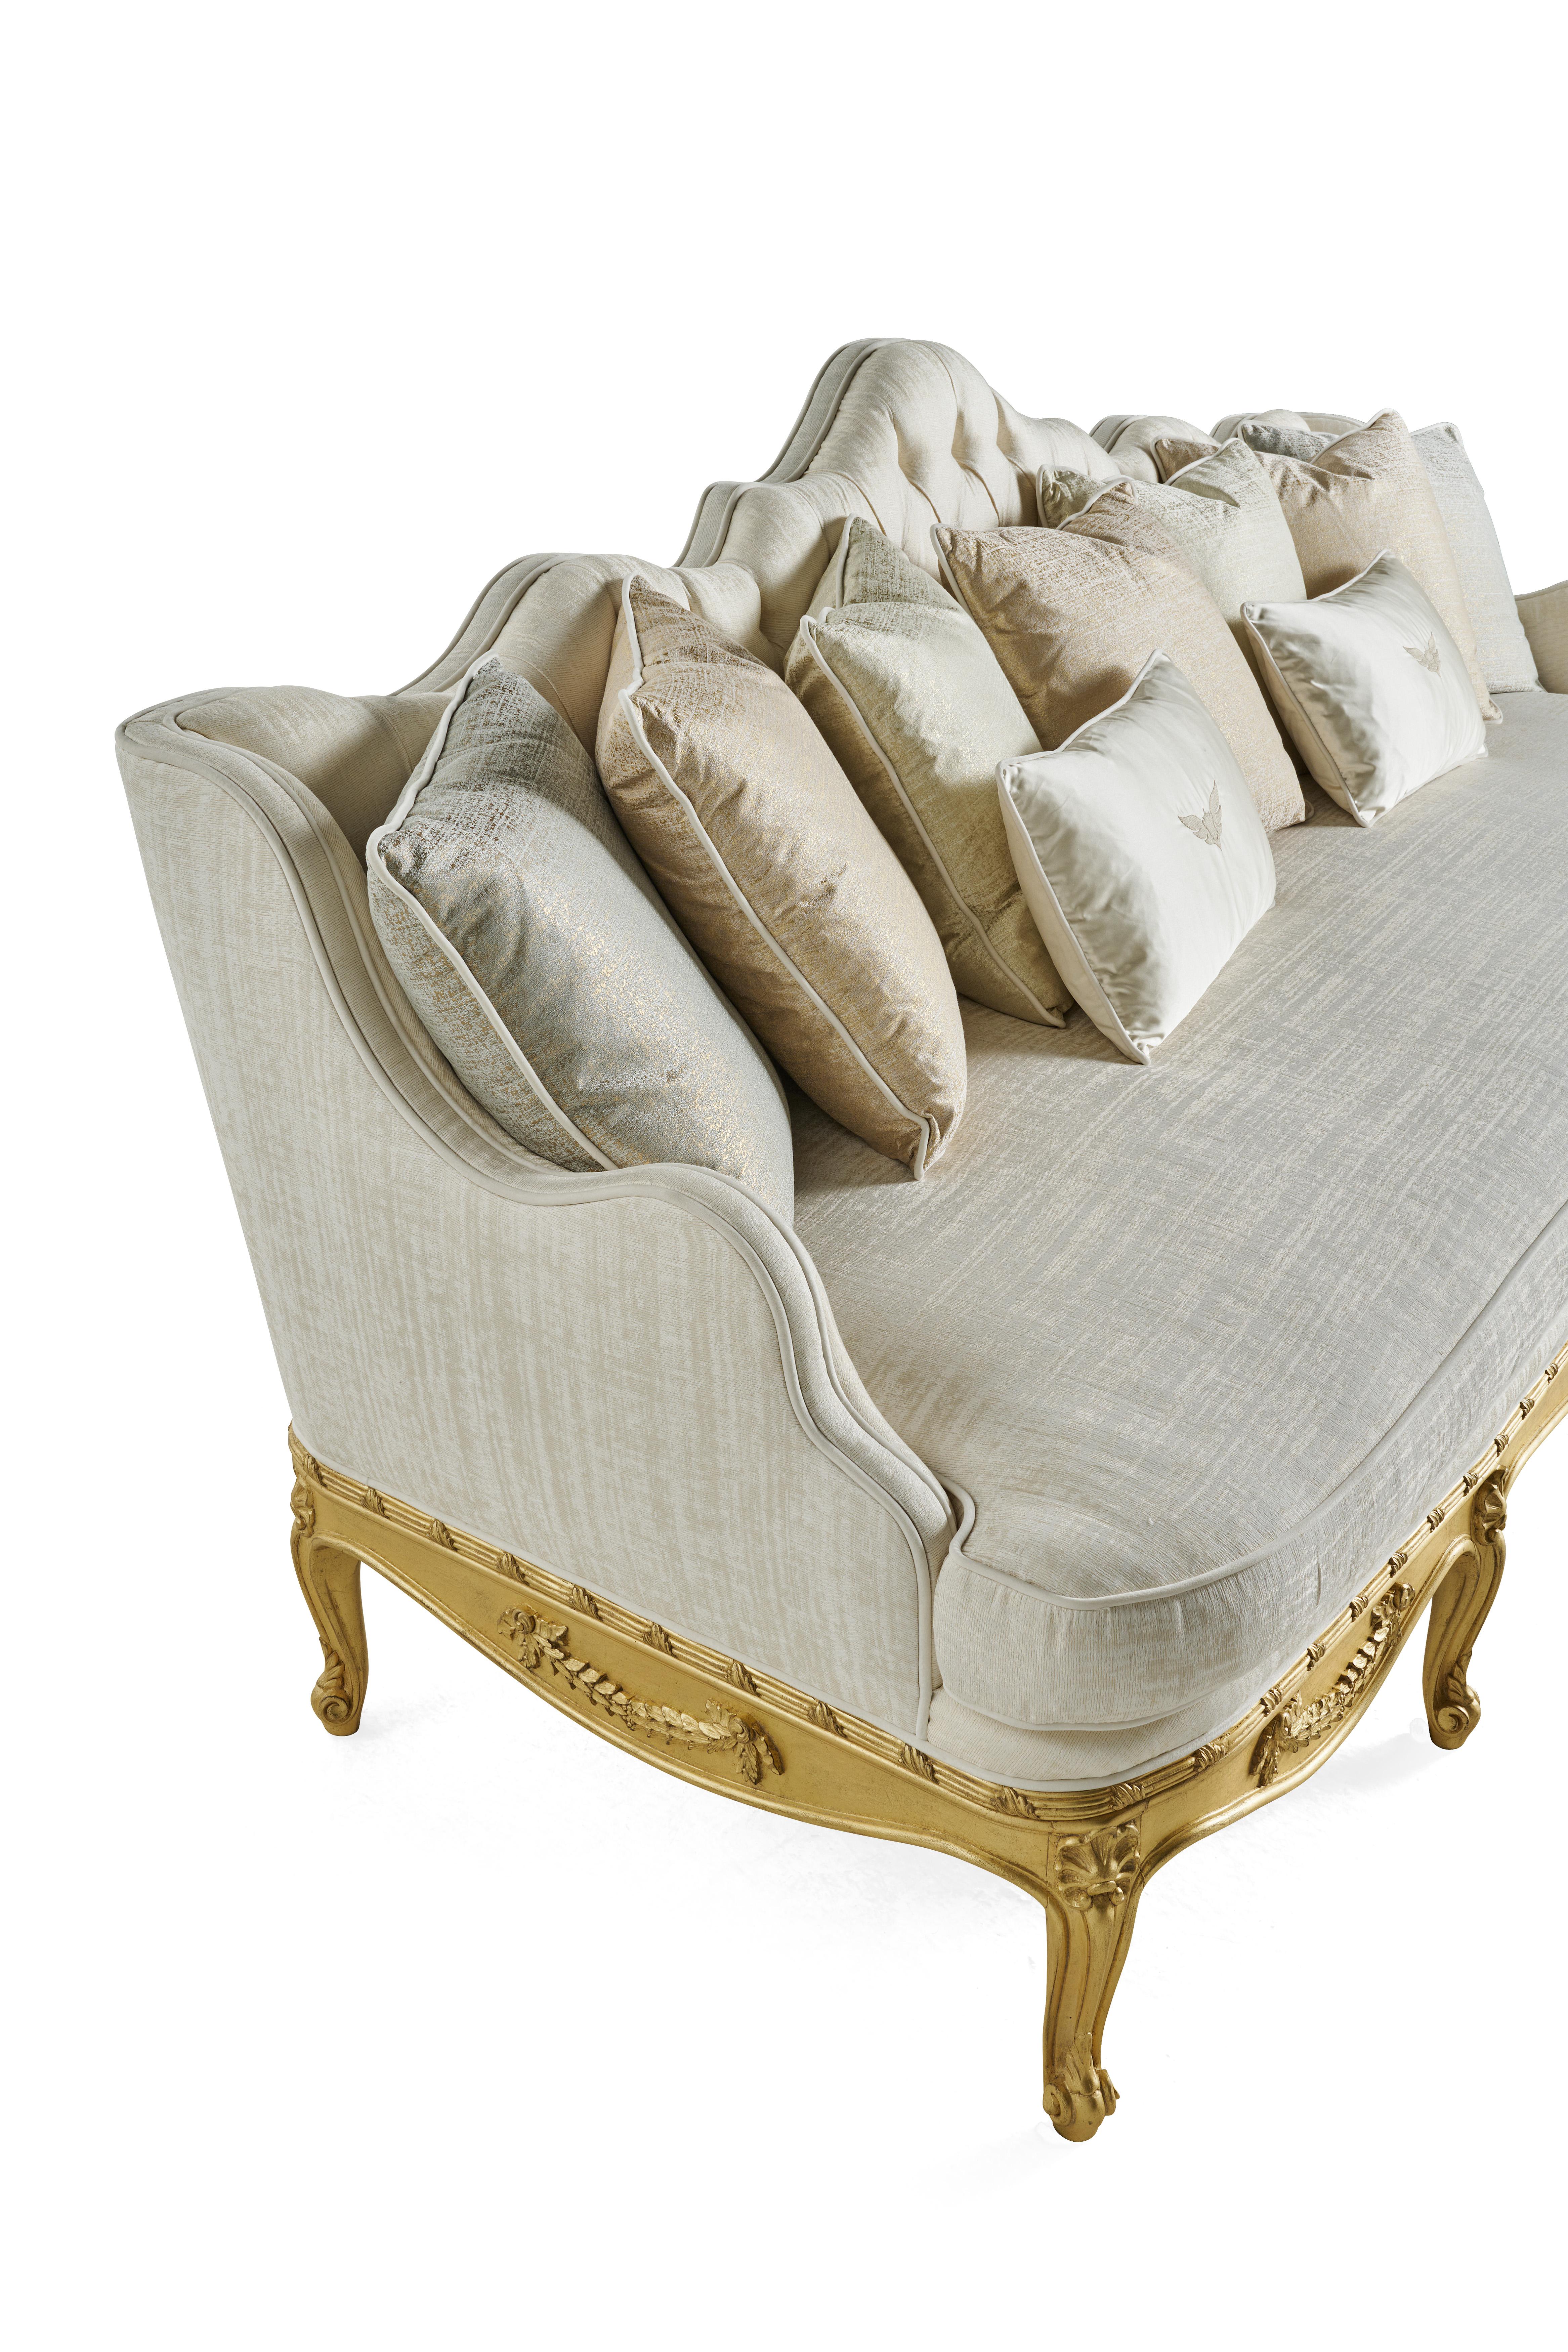 21st Century Verveine 3-Seater Sofa in Fabric with Gold Leaf finishing In New Condition For Sale In Cantù, Lombardia